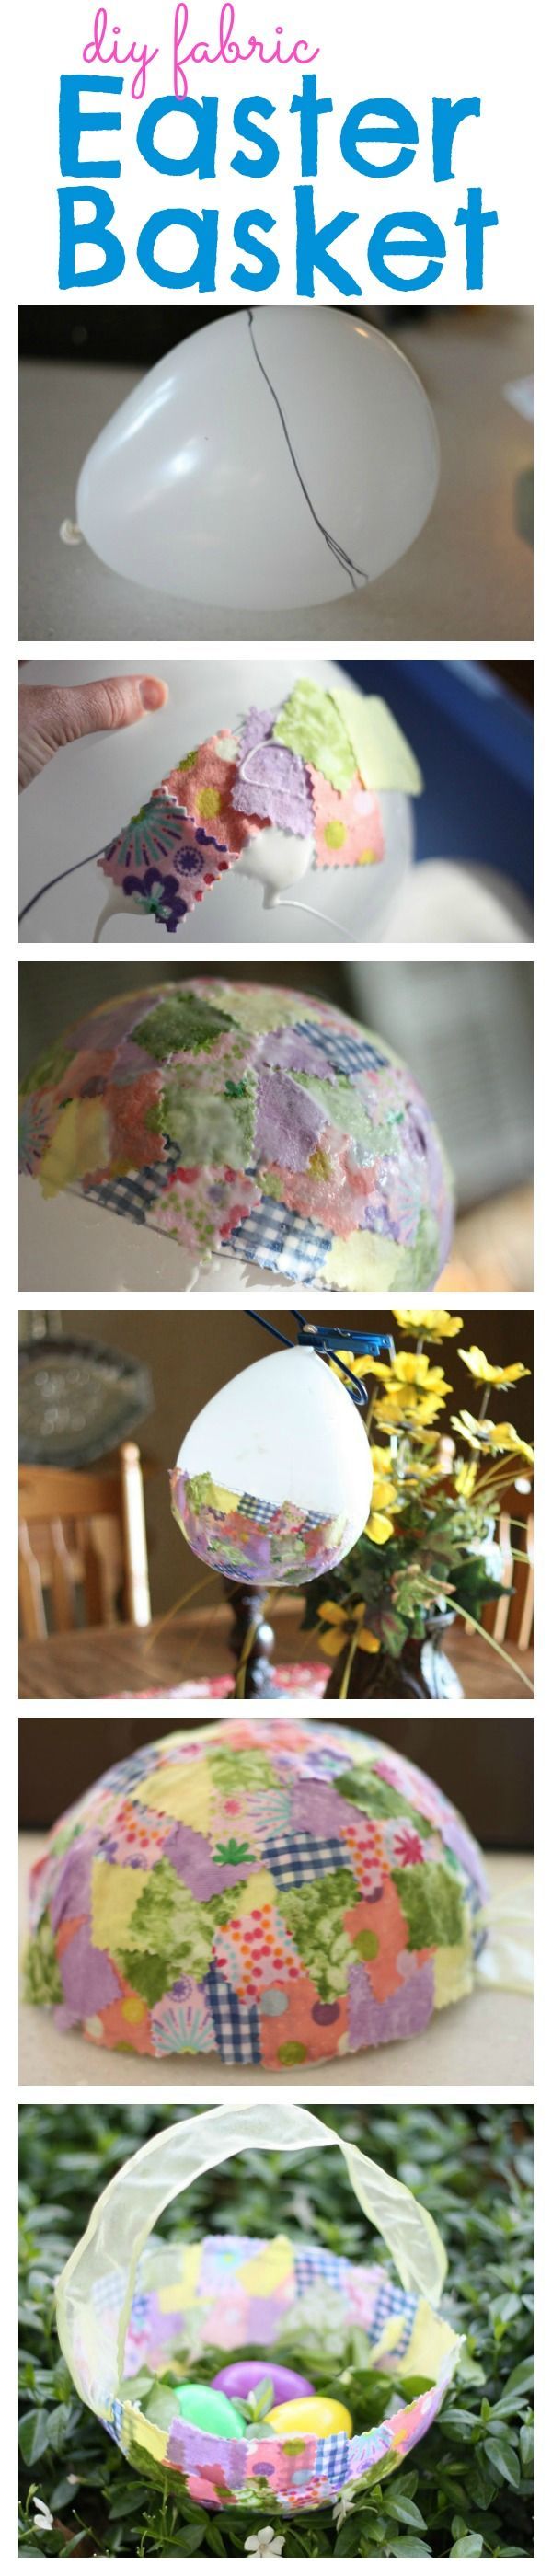 Except it being a basket make it into a large fabric egg. Seeing as the mod podge will keep it